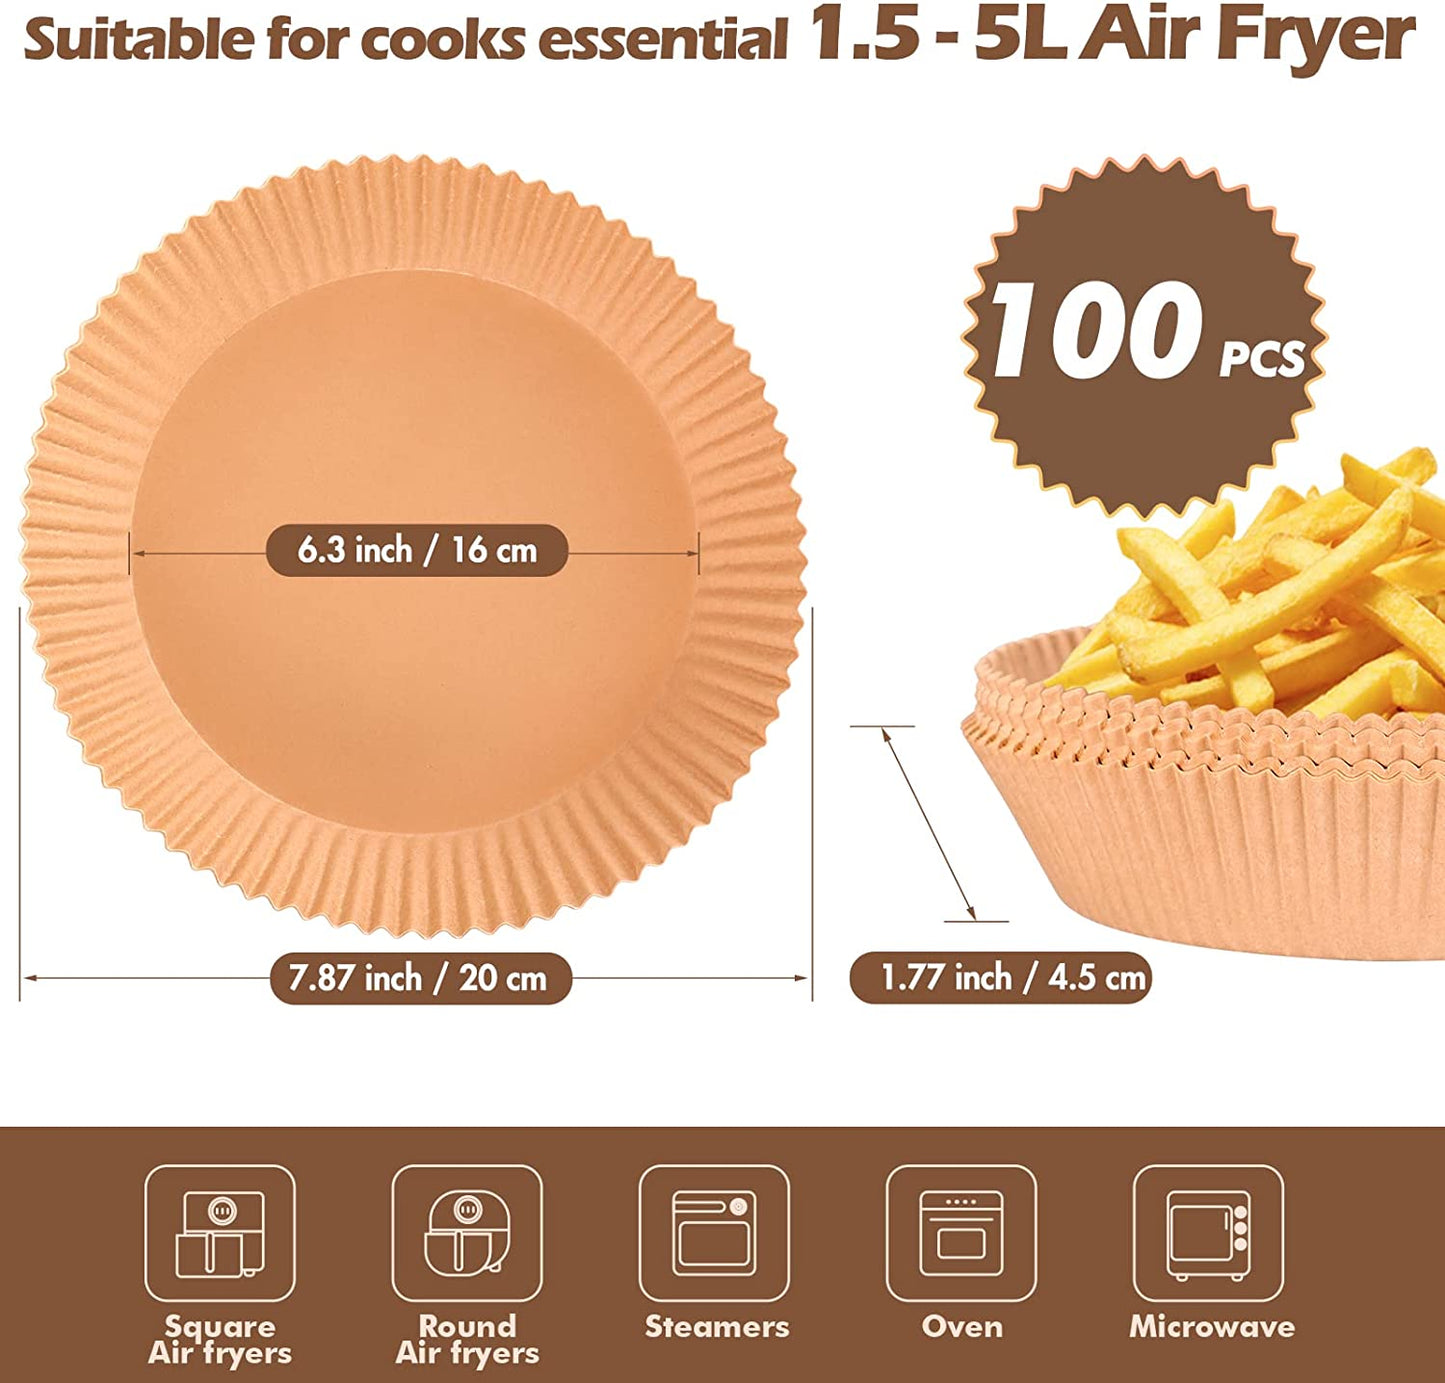 https://webakemall.com/cdn/shop/products/Webake_Air_Fryer_Liners_6.3_Inch_Disposable_Paper_Liner_100pcs_Parchment_Paper_Oil-proof_Water-proof_Non-stick_Round_Small_Air_fryer_Basket_Filters_Liners_for_Baking_Roasting_Cookin.jpg?v=1658906752&width=1445